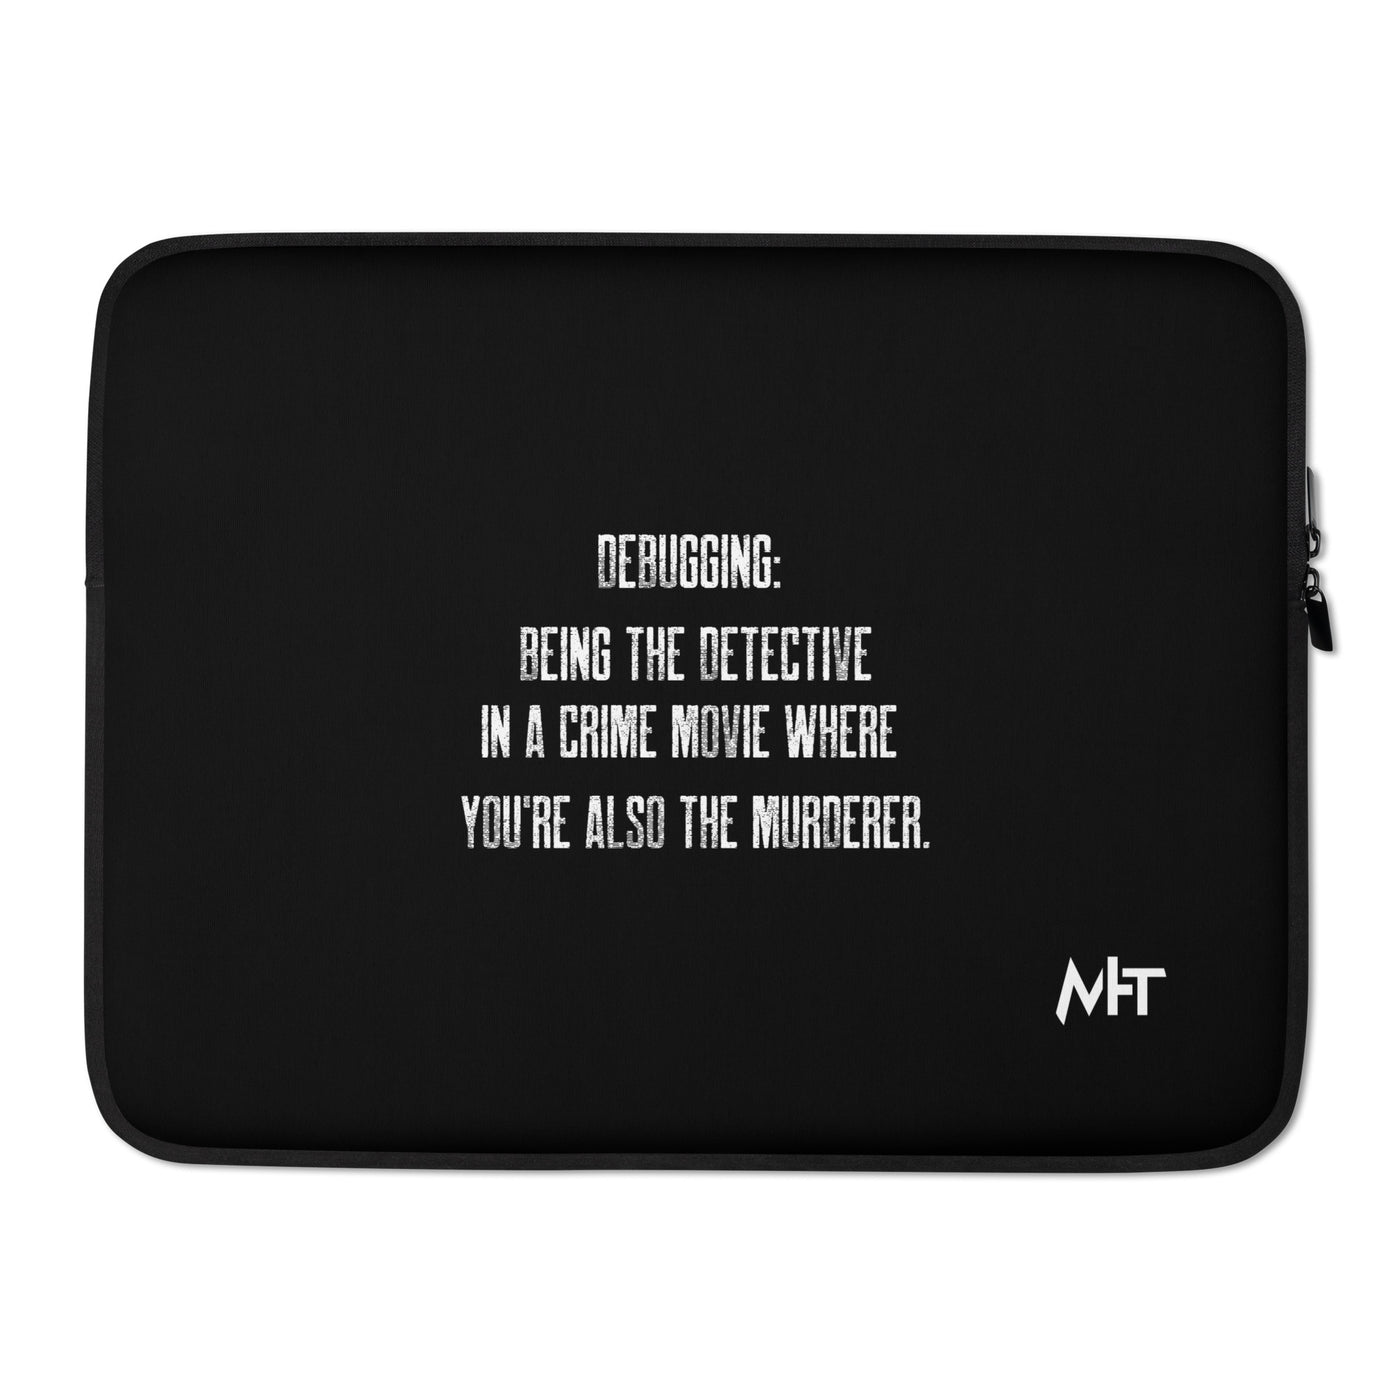 Debugging Being the detective in a crime movie where you are also the murderer V2 - Laptop Sleeve